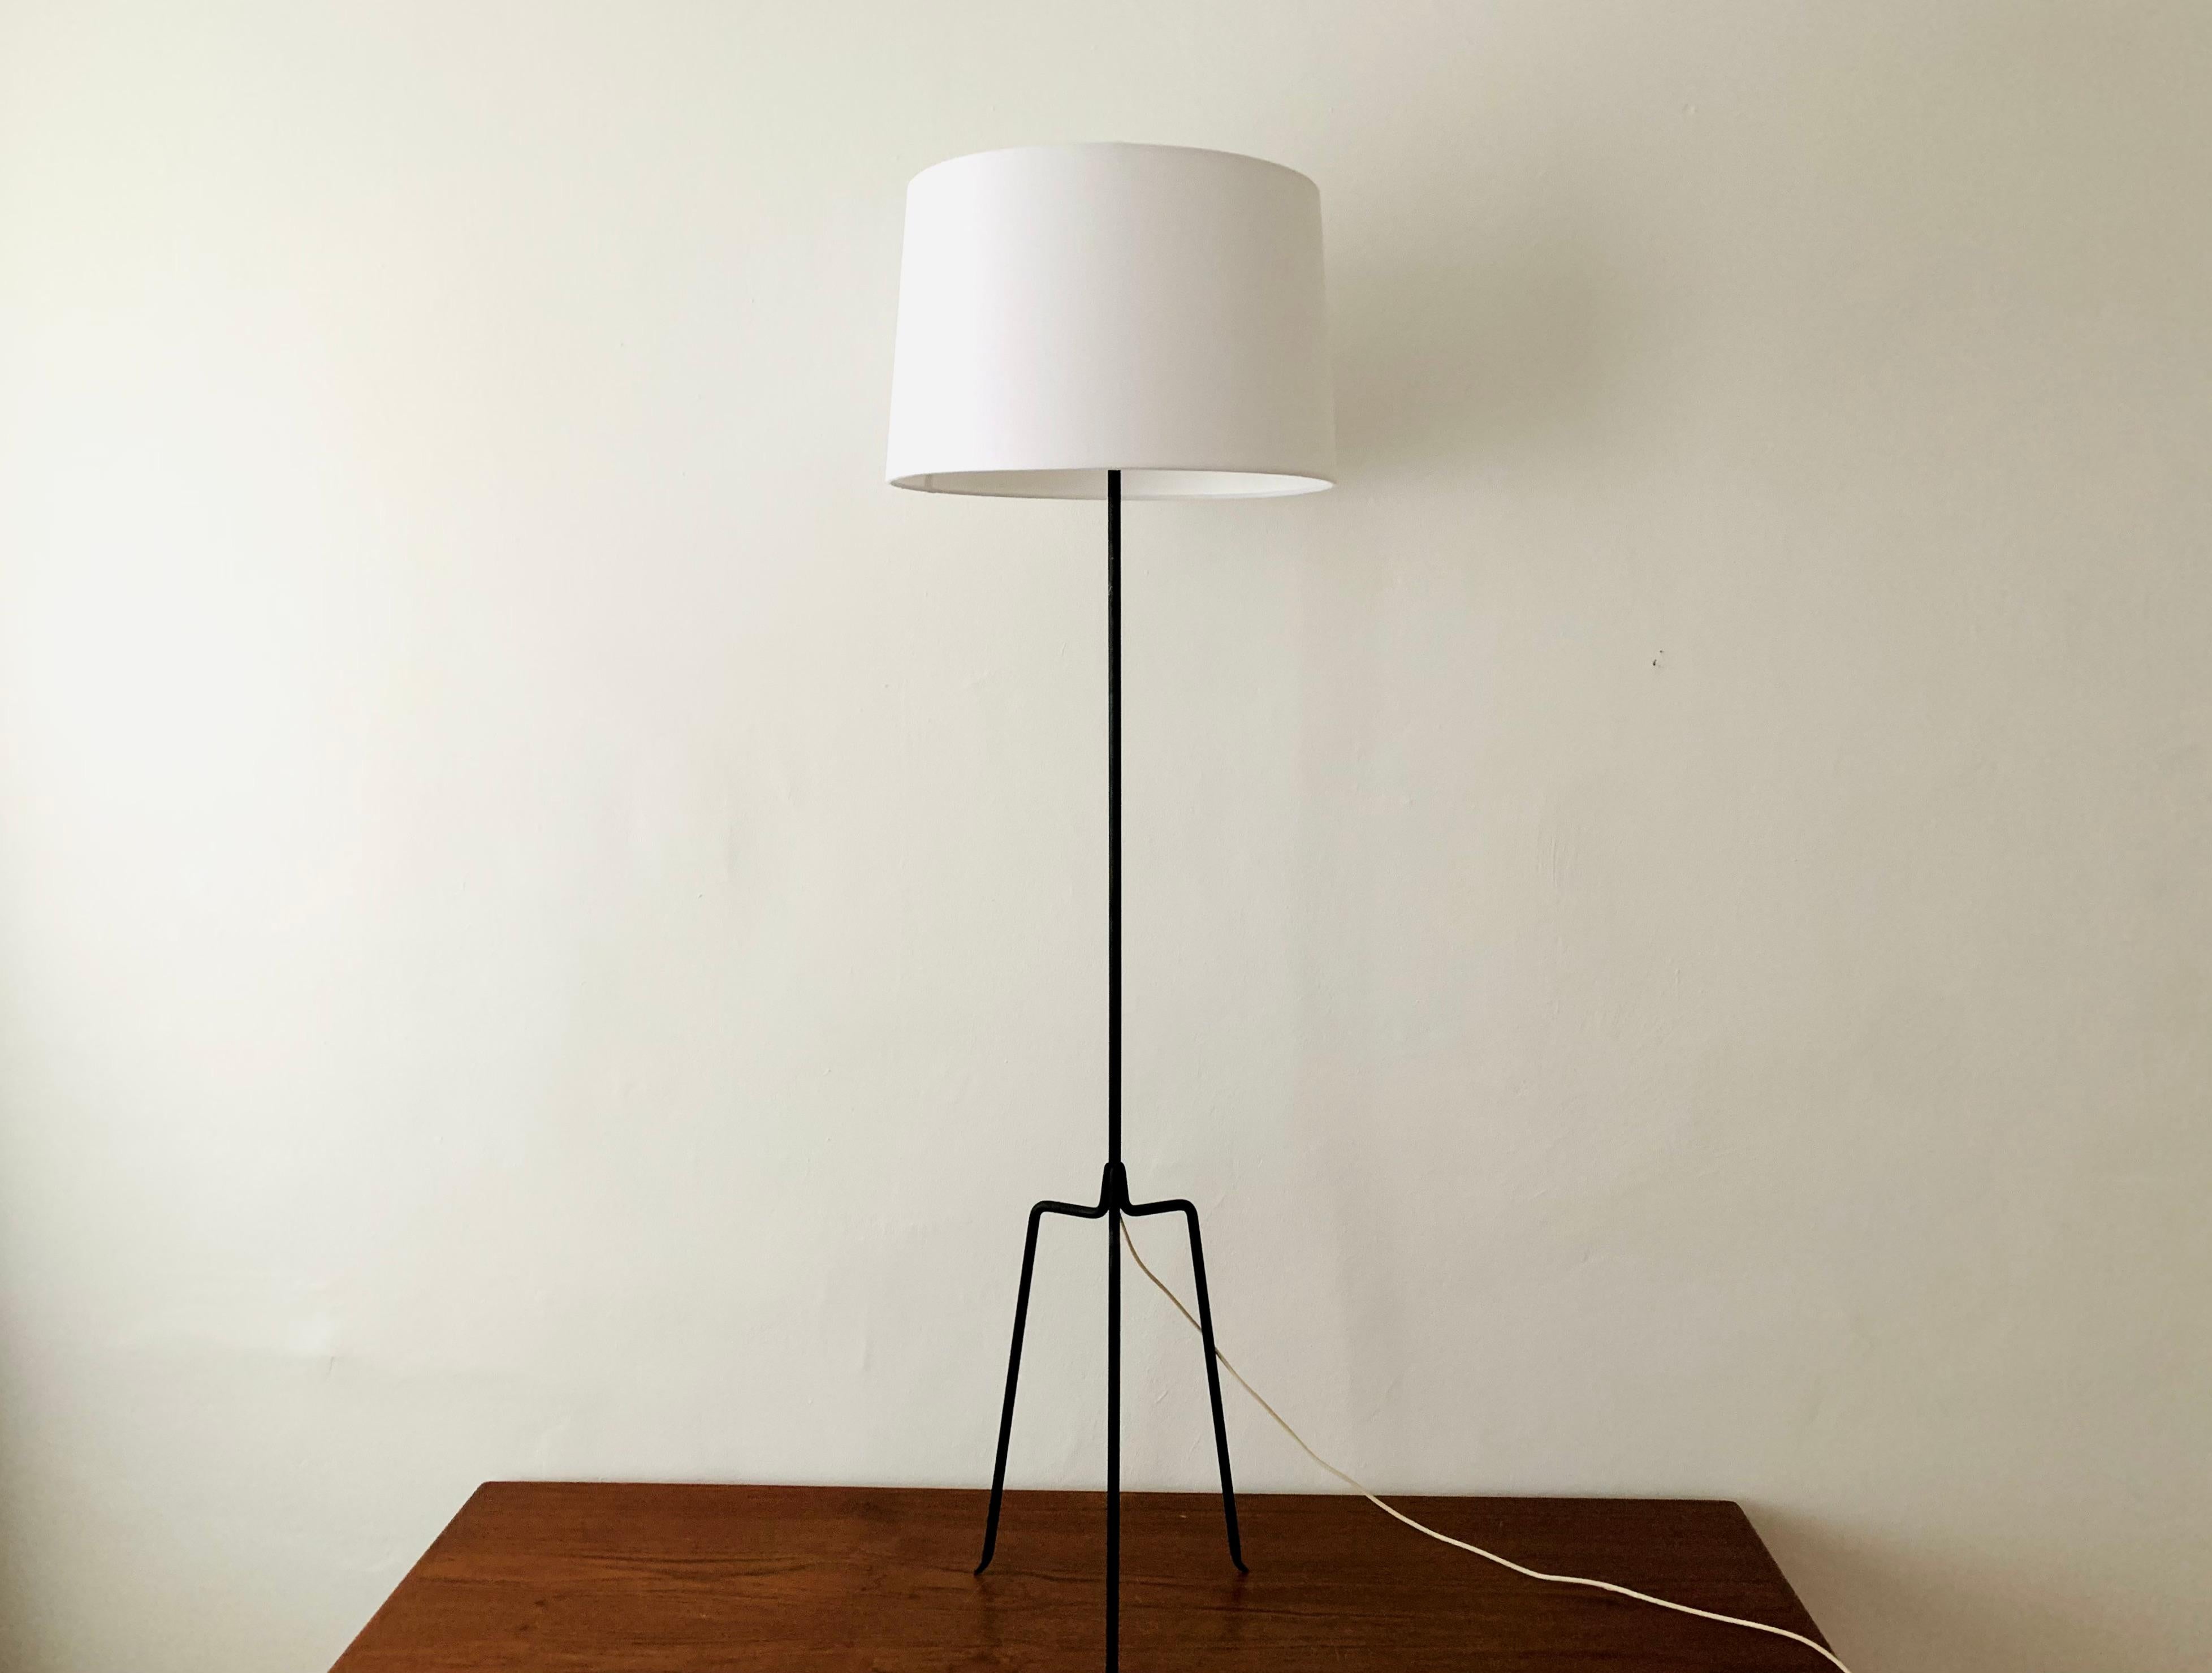 Very beautiful and elegant floor lamp from the 1950s.
Wonderful and contemporary design.
A highlight for every room.

Condition:

Very good vintage condition with minimal signs of wear consistent with age.
The frame was repainted
The